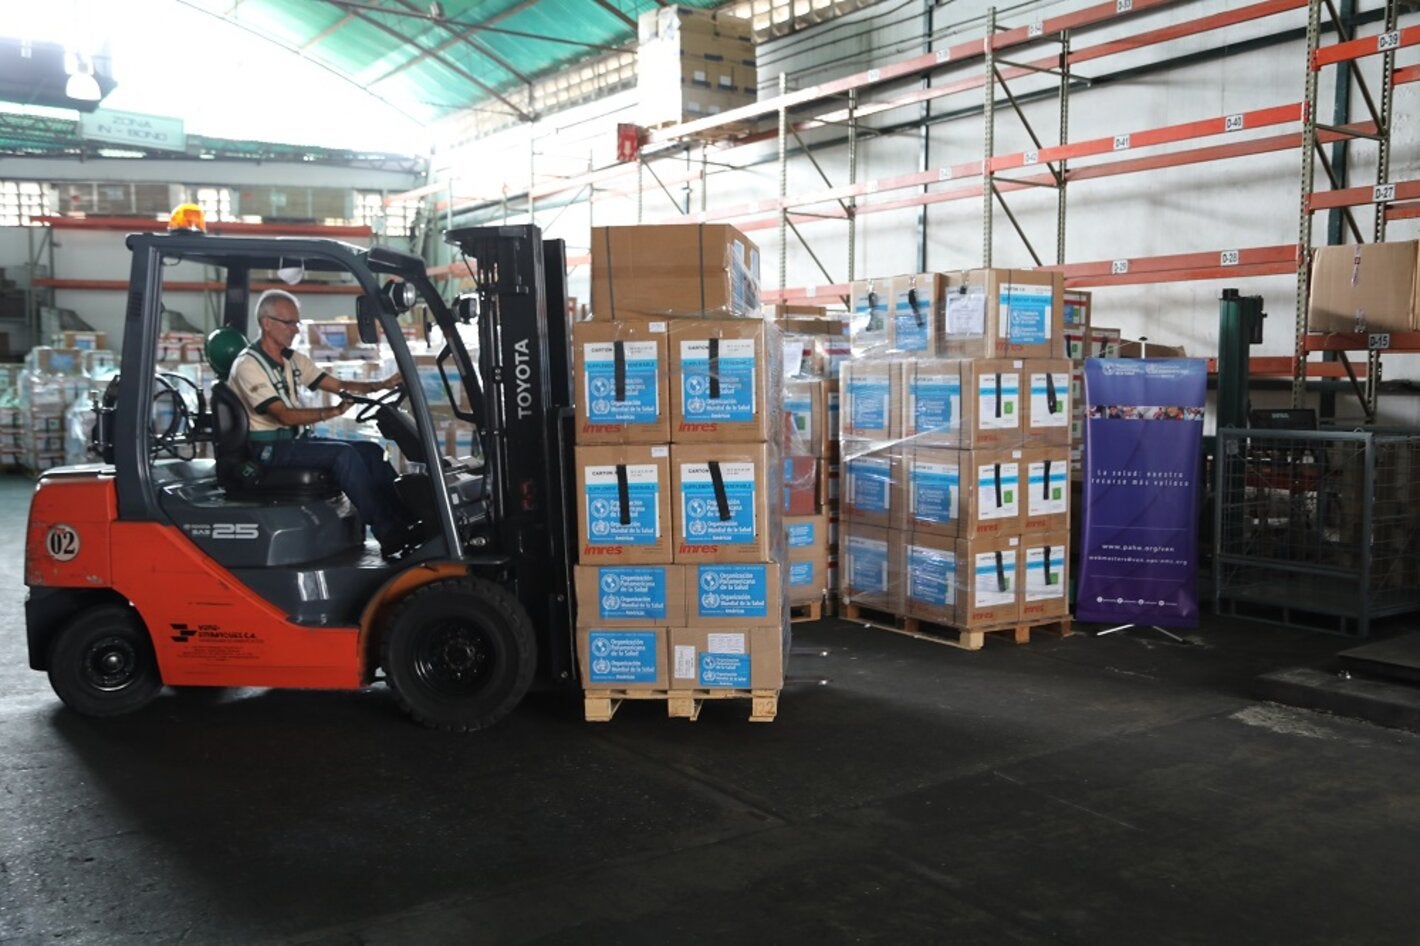 PAHO delivers a further 50 tons of medicines to treat Venezuelans in 2018